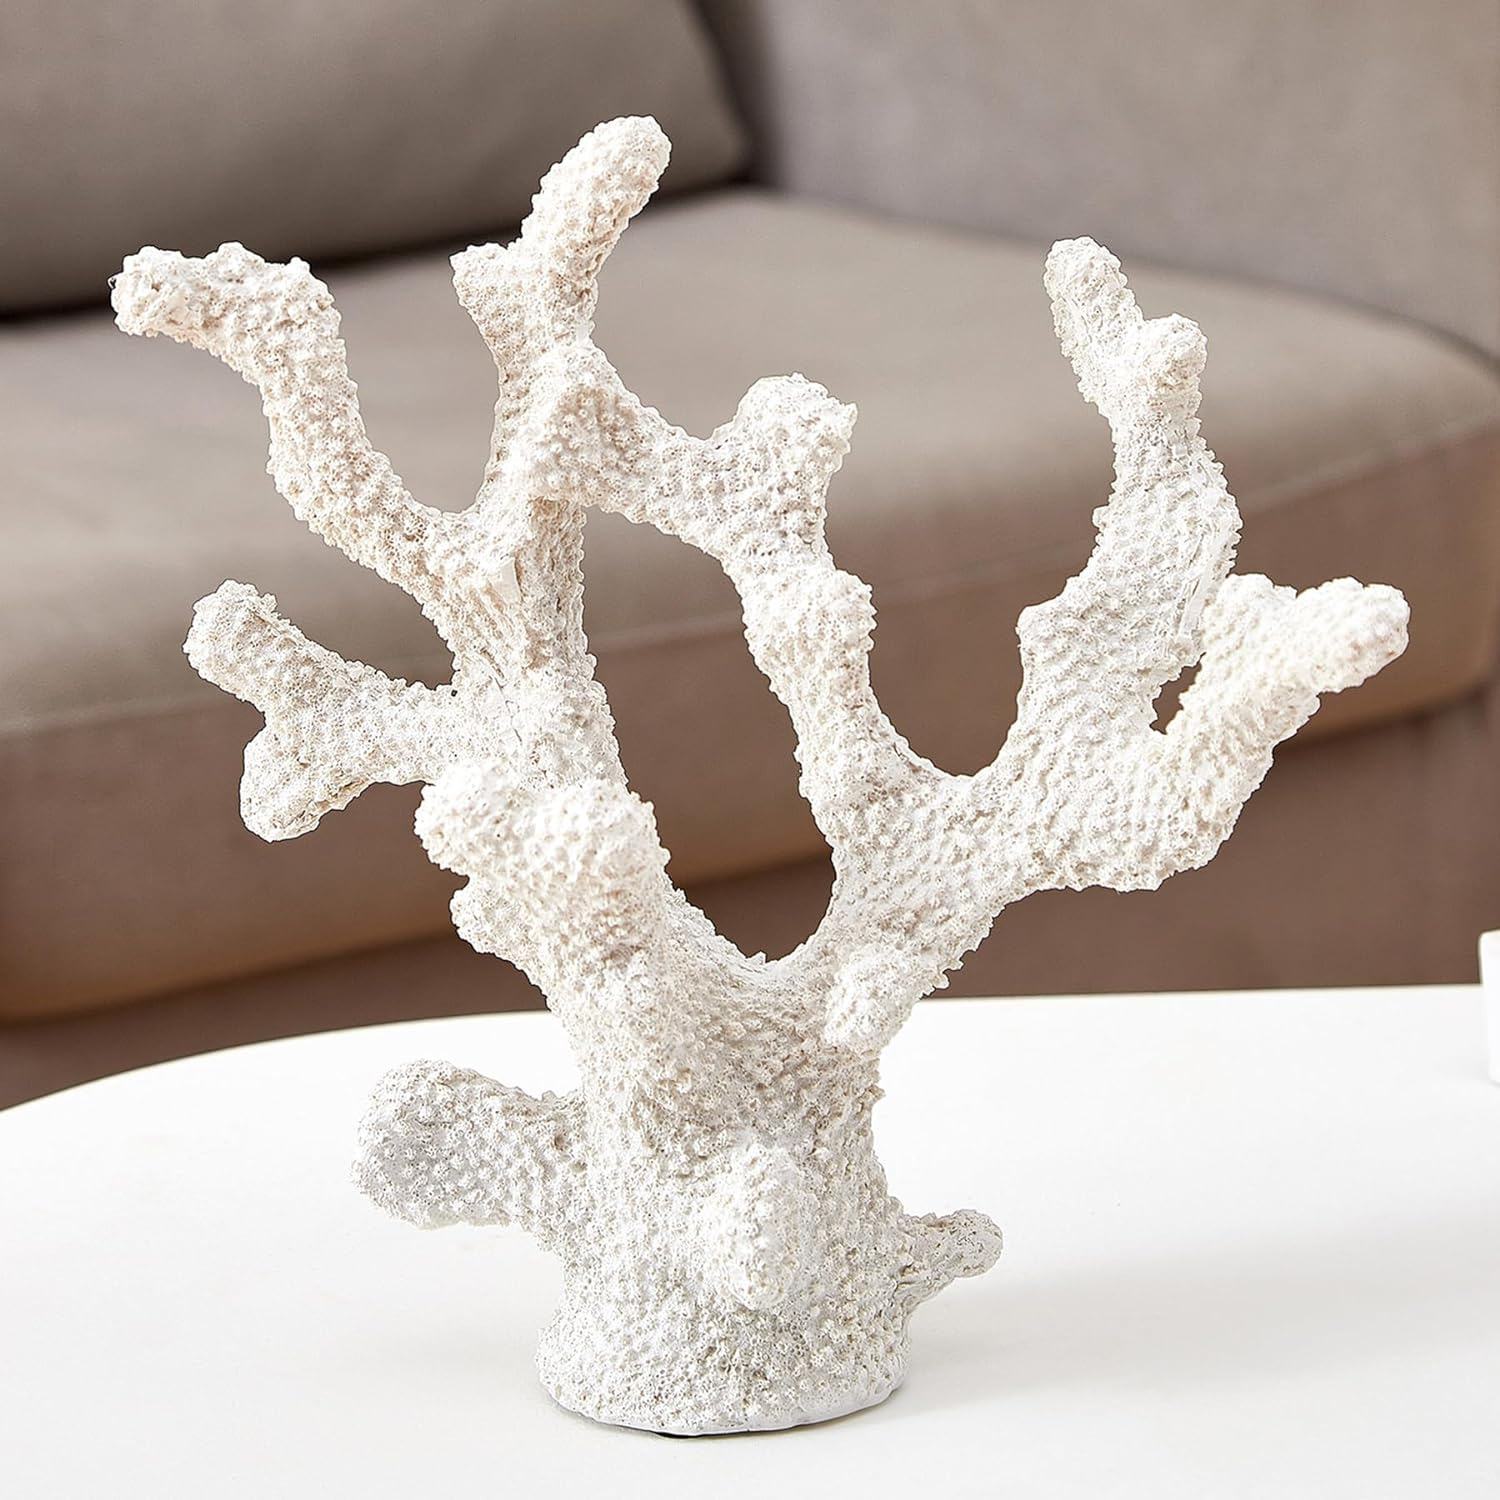 Coral Reef Décor,White Coral Reef Ornament, Faux Artificial Coral Statue, Nautic